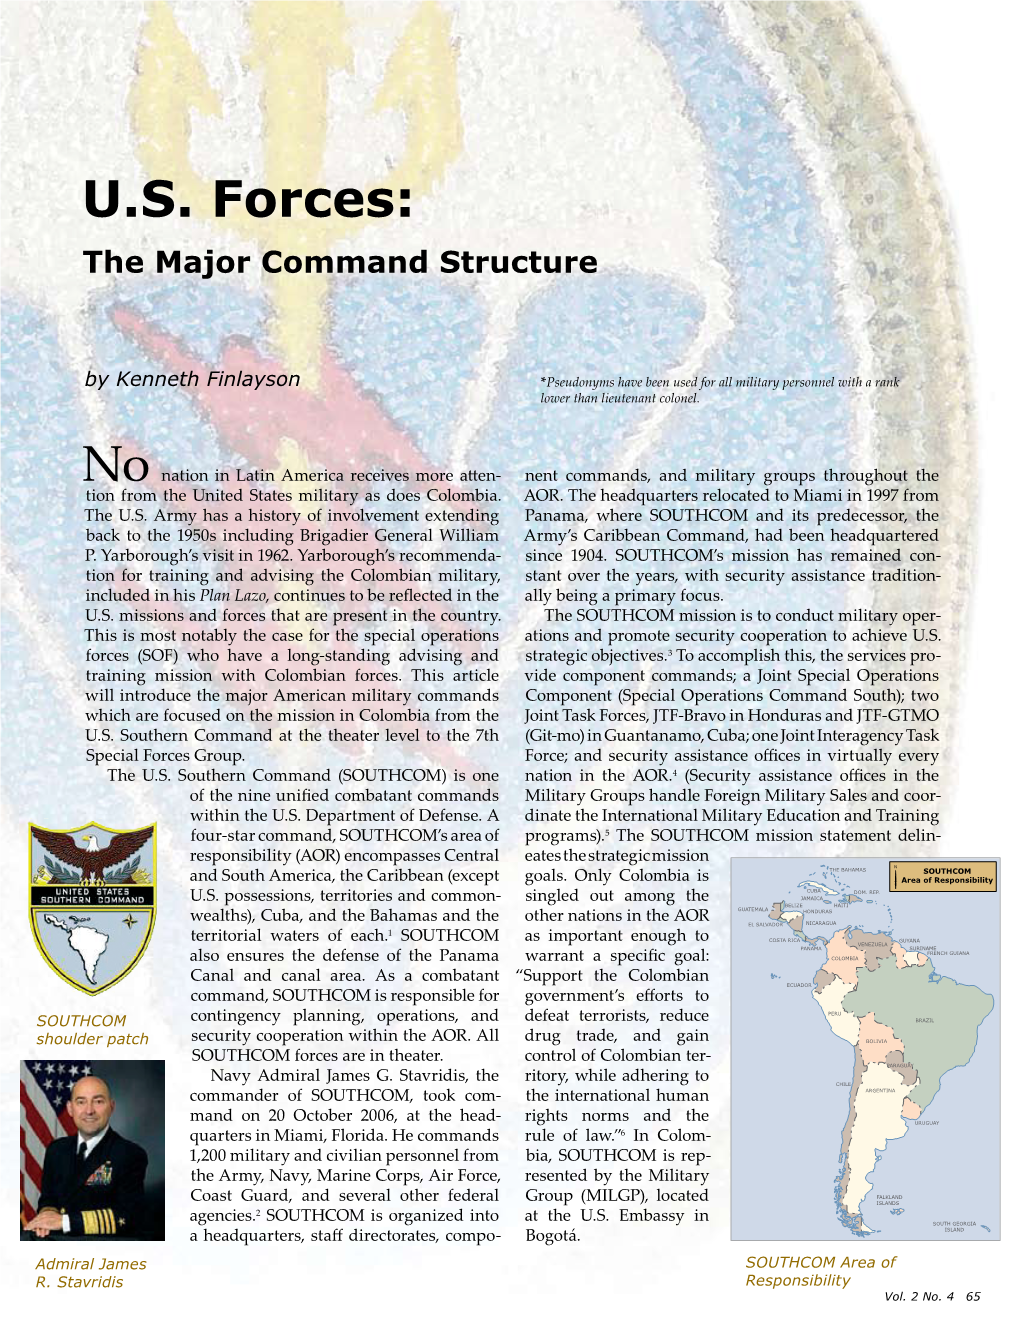 U.S. Forces: the Major Command Structure